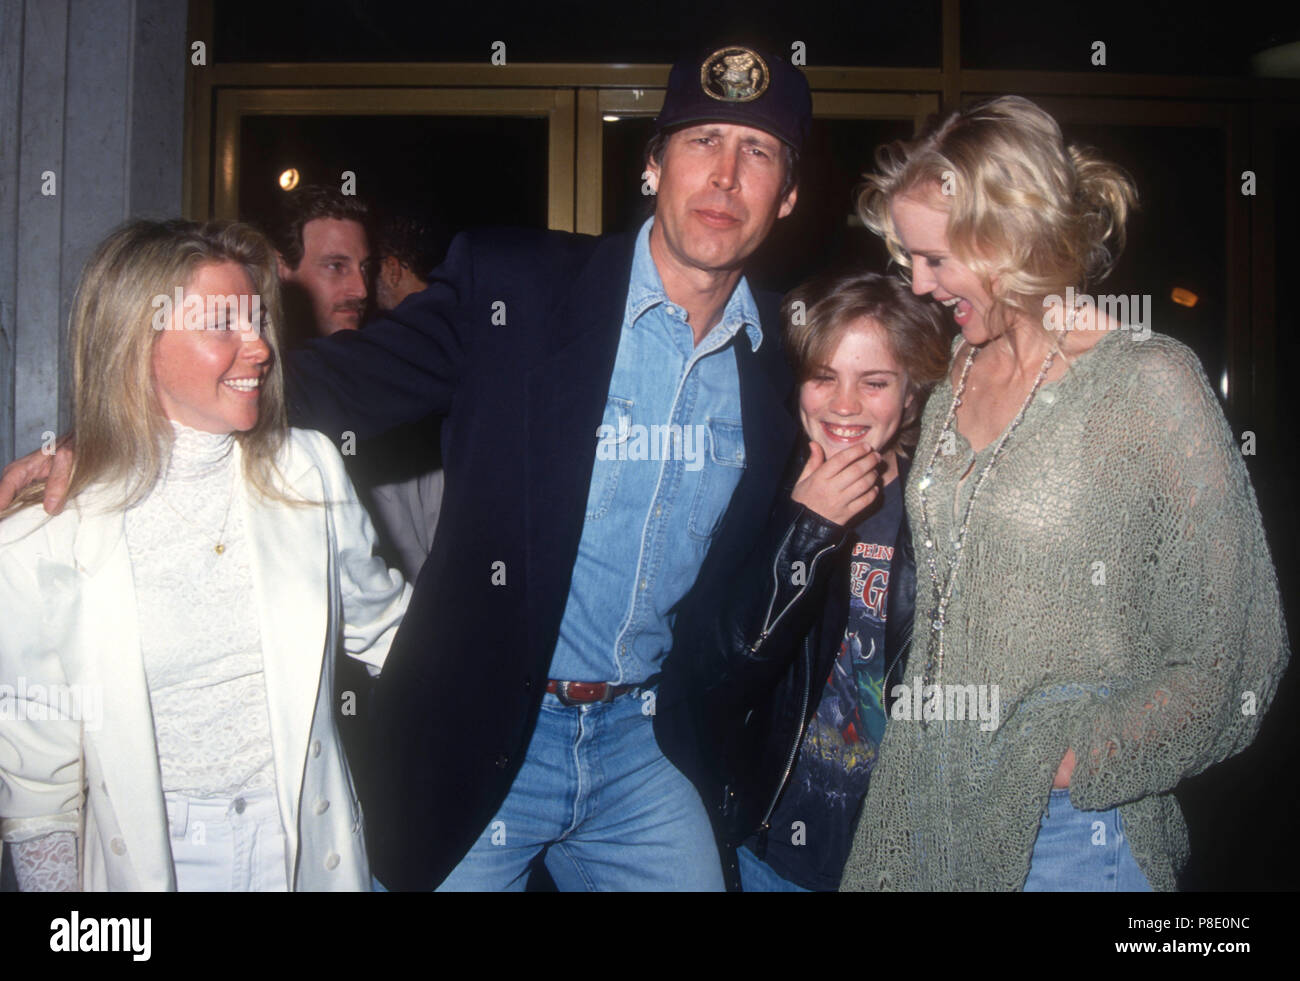 WESTWOOD, CA - FEBRUARY 25: Jayni Chase and husband Actor Chevy Chase, actress Daryl Hannah and nephew Jeremiah attend 'Memoirs of an Invisible Man' Premiere on February 25, 1992 at Mann's National Theater in Westwood, California. Photo by Barry King/Alamy Stock Photo Stock Photo